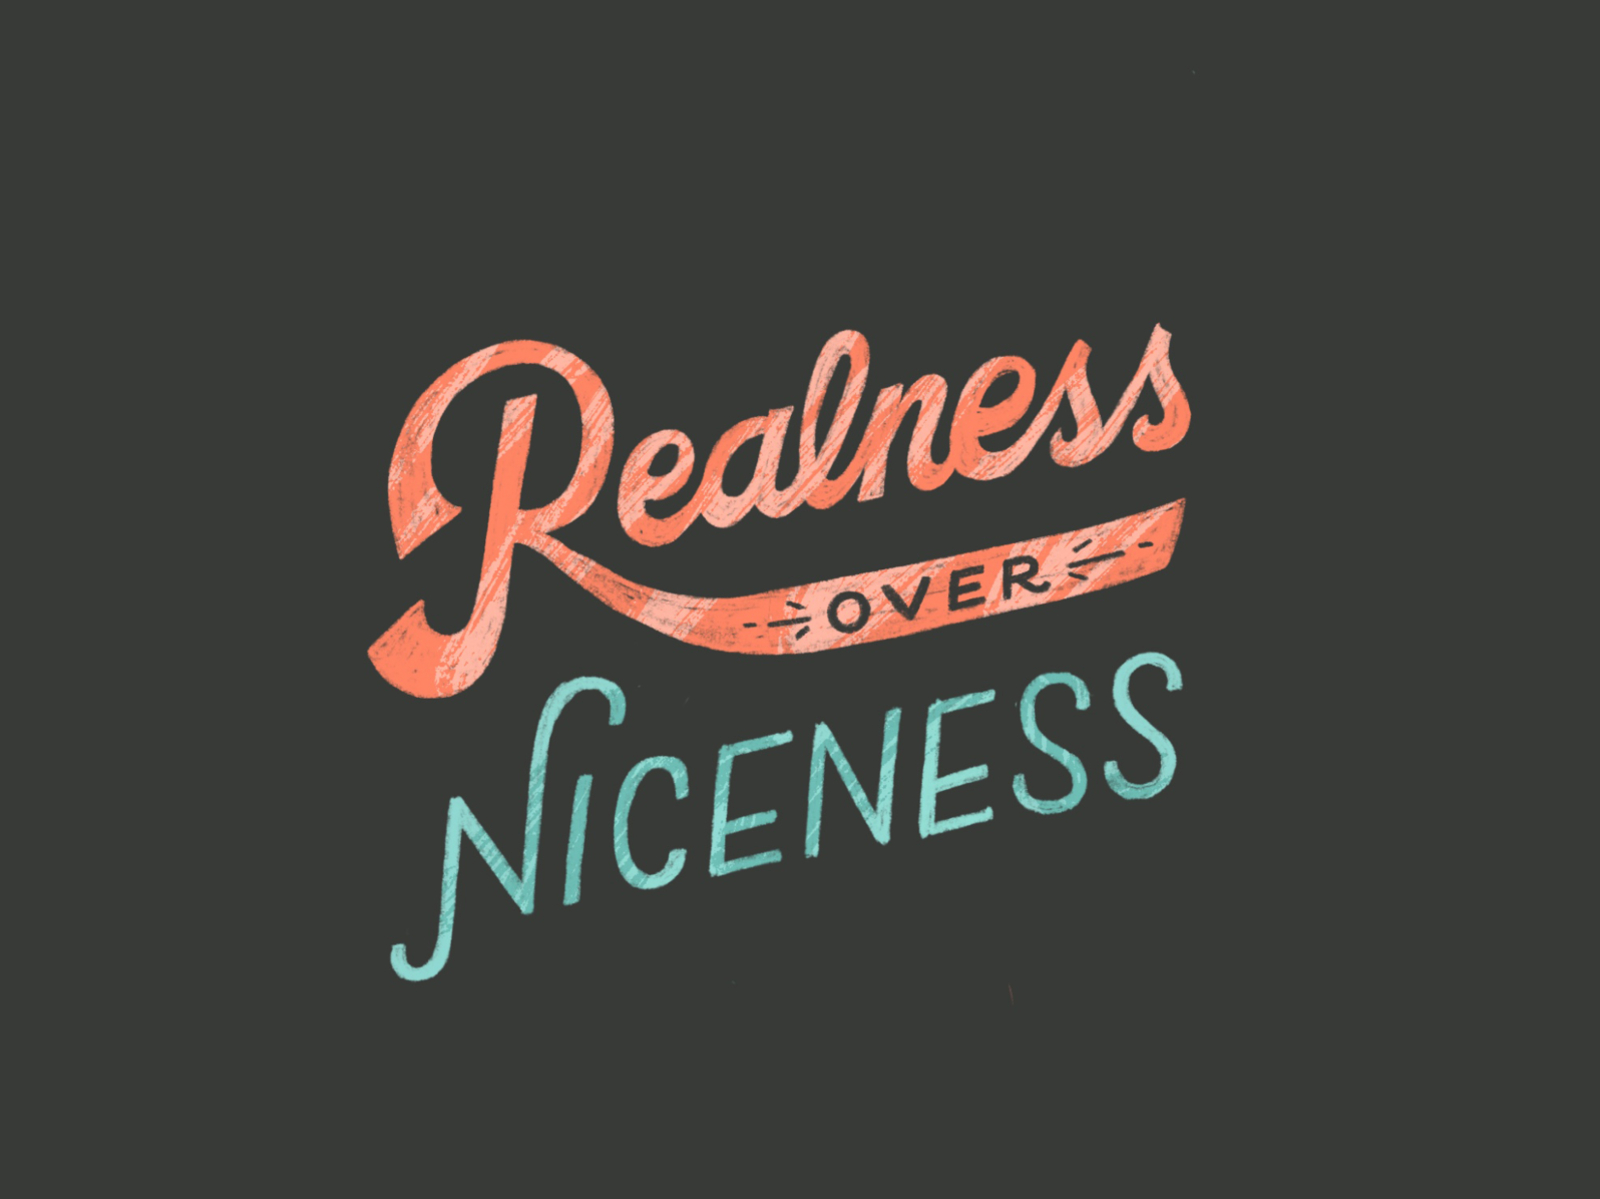 Realness Over Niceness by Lindsey Naylor on Dribbble